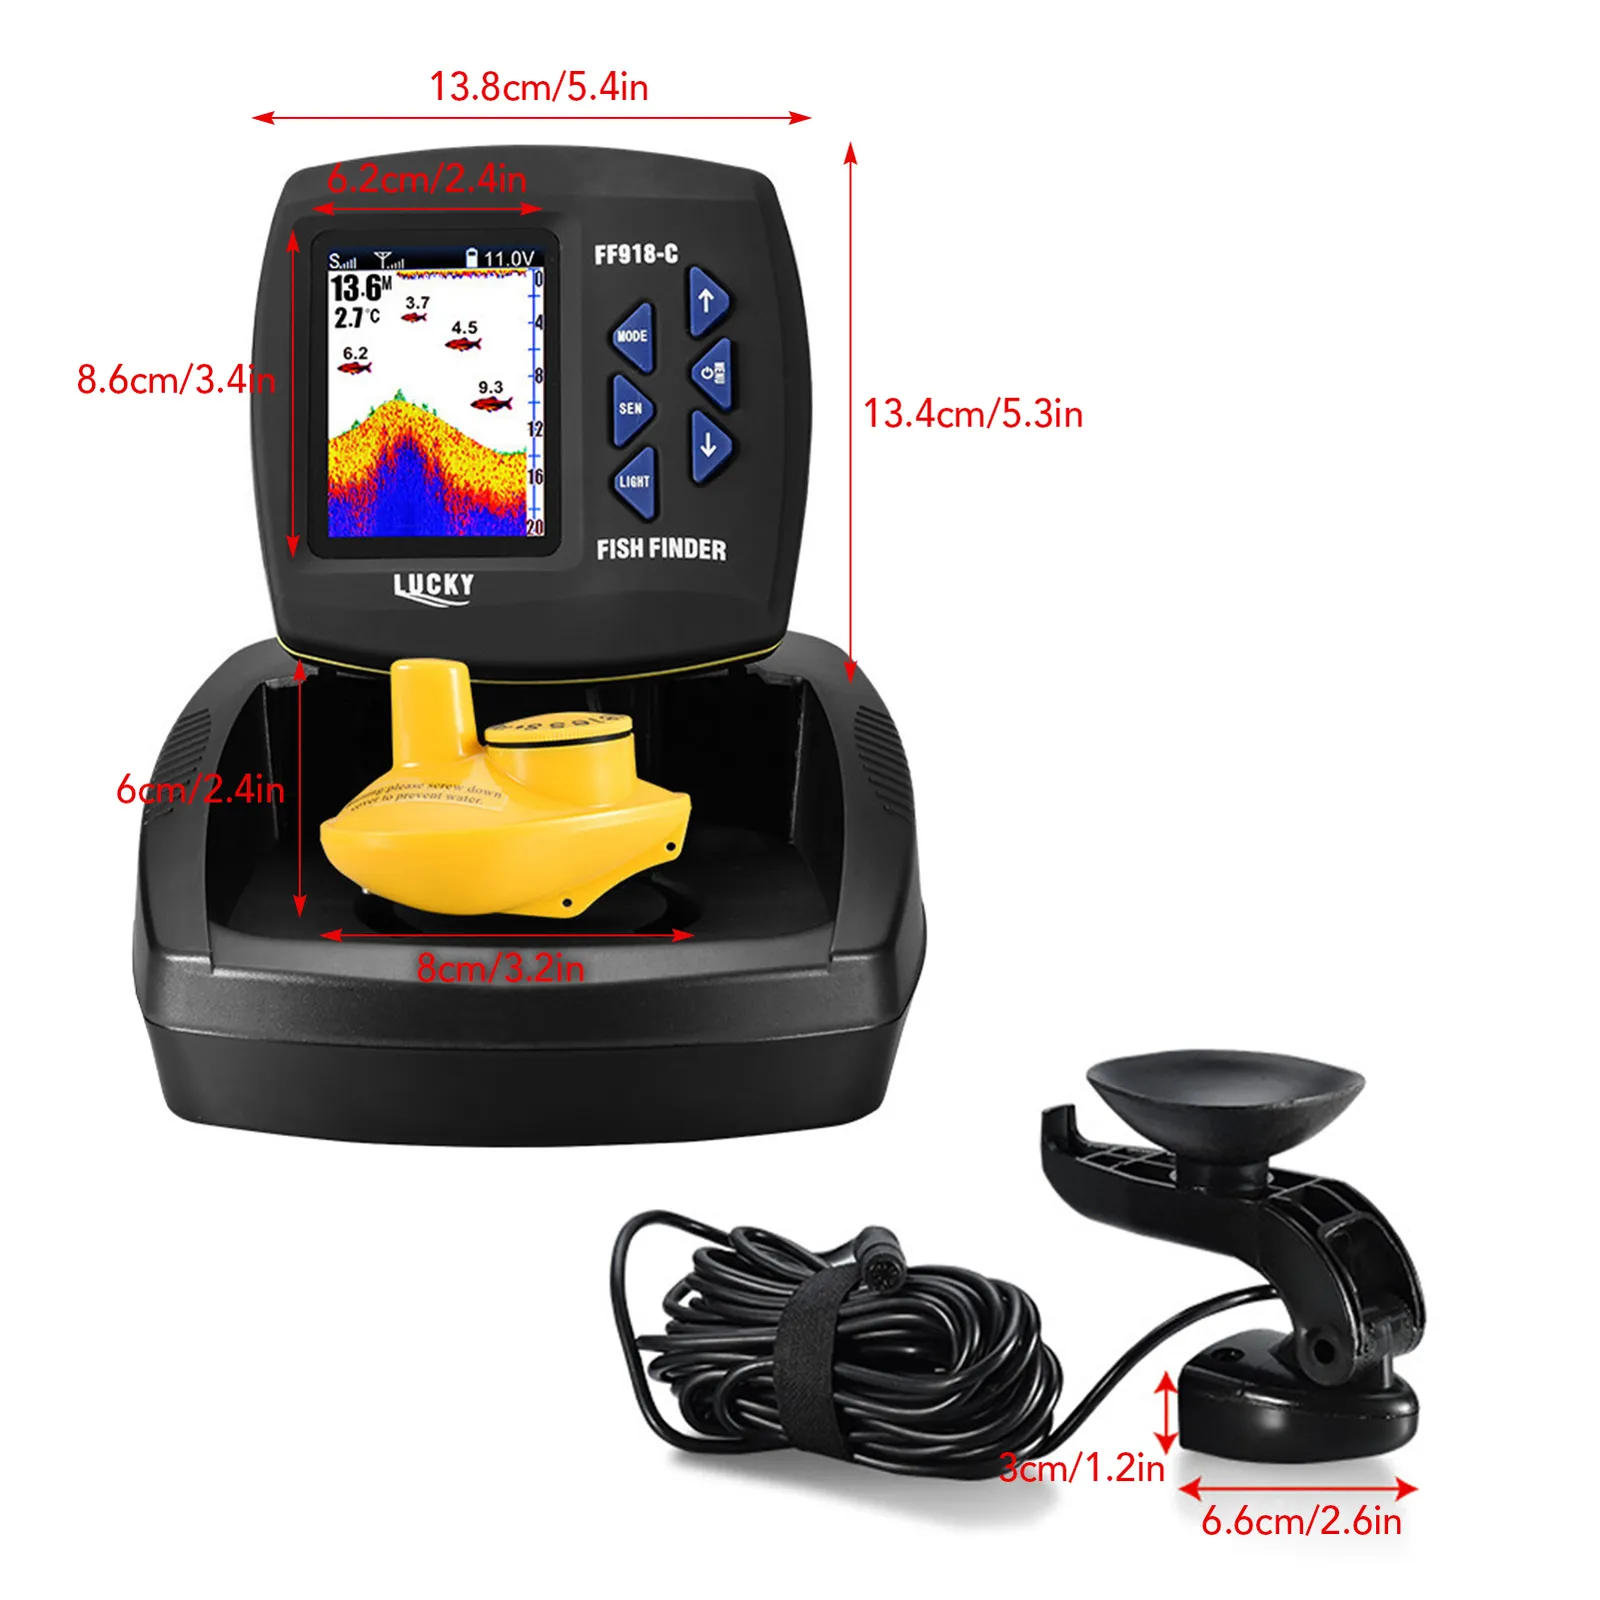 Wireless Sonar Boat Sonar Fish Finder With Depth Finder And Wired  Transducer For Boat, Kayak, And Fishing FF918 From Dao05, $32.39